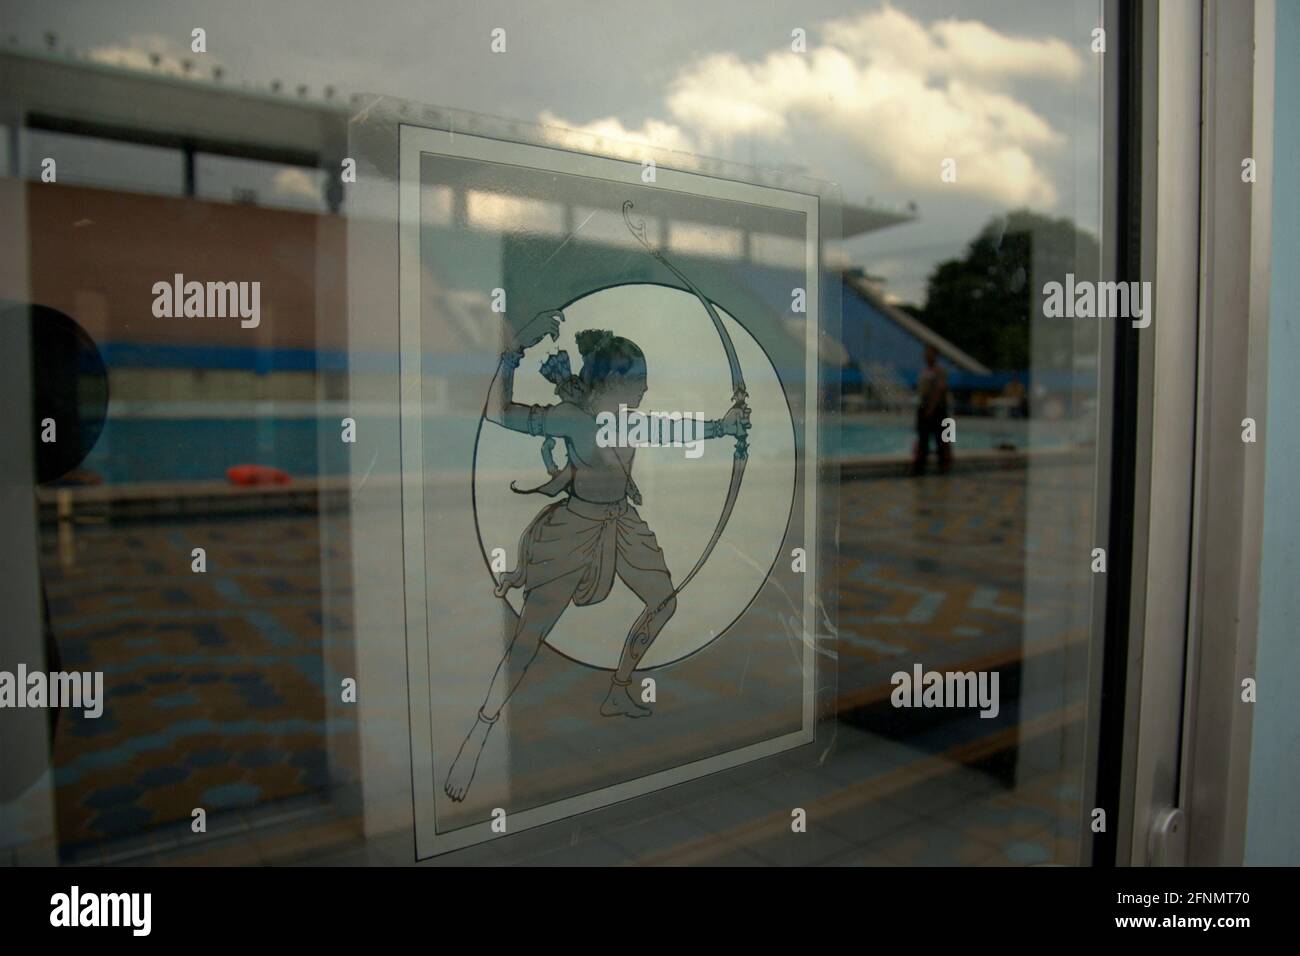 Logo of Senayan Sports Complex (Gelora Bung Karno) on a glass door at aquatic sports center in Senayan Sports Complex (Gelora Bung Karno), Jakarta, Indonesia. Stock Photo